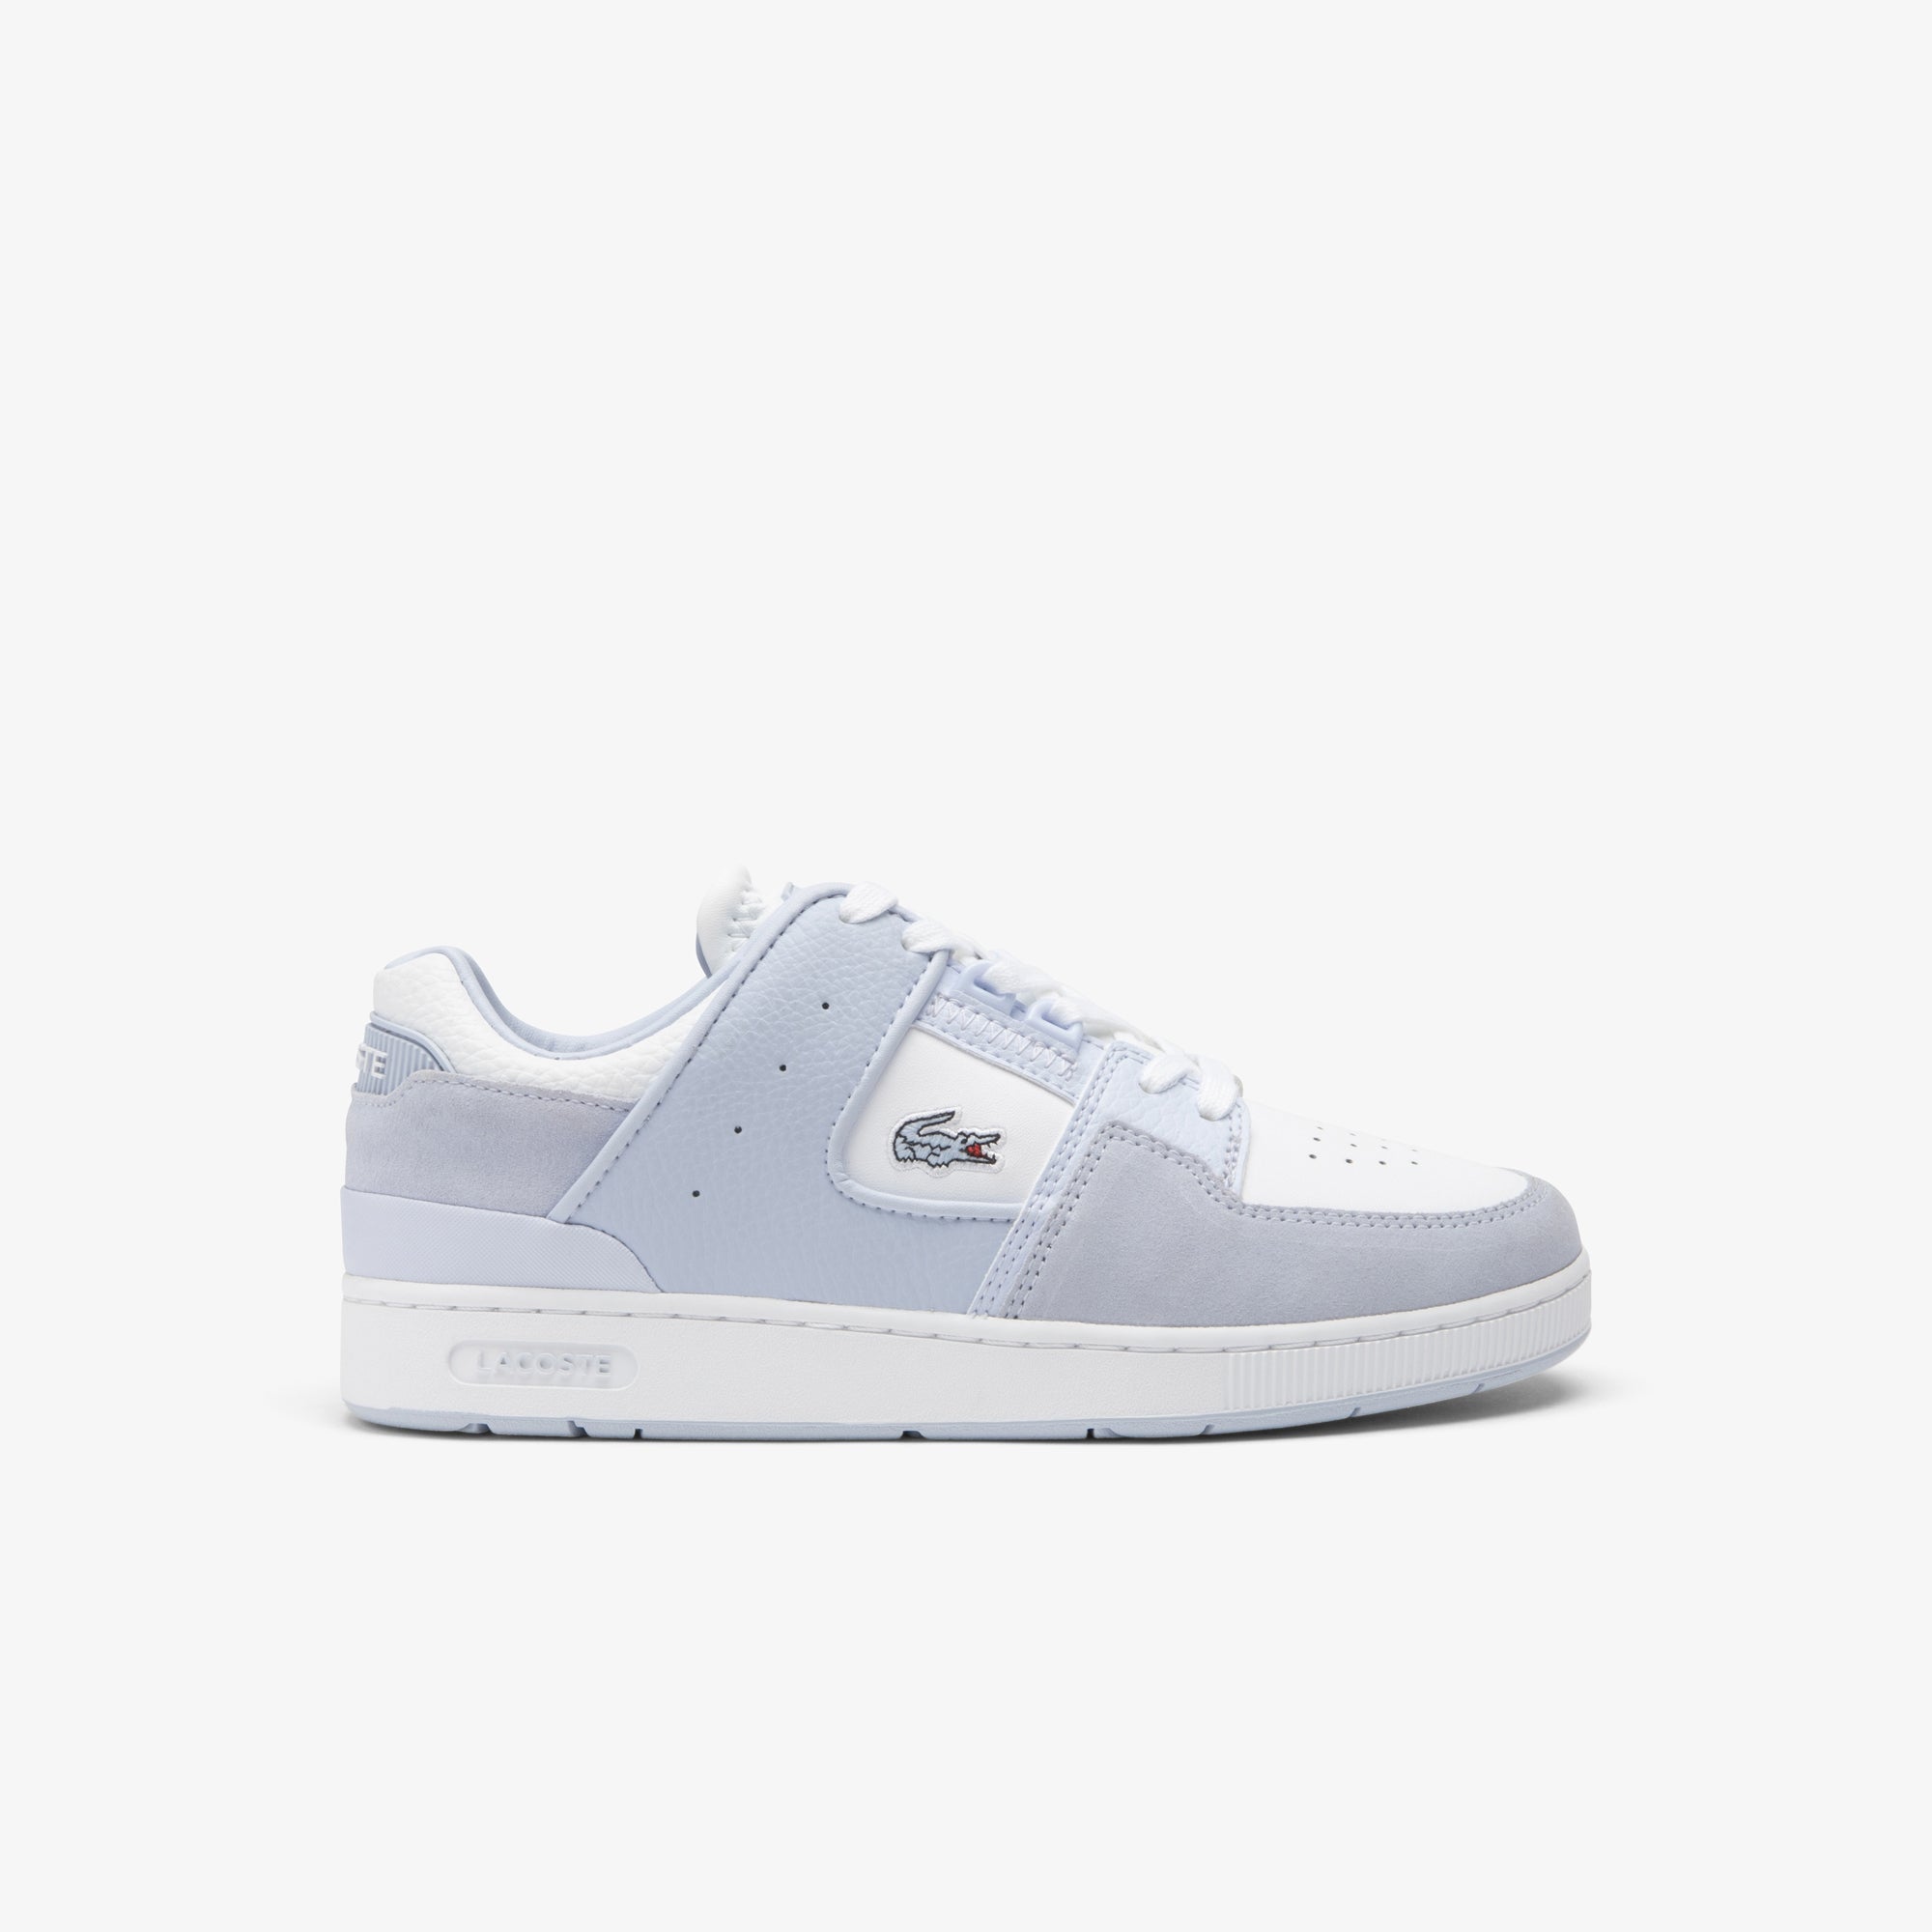 Lacoste - Court Cage 124 2 Sneaker - Light Blue/White